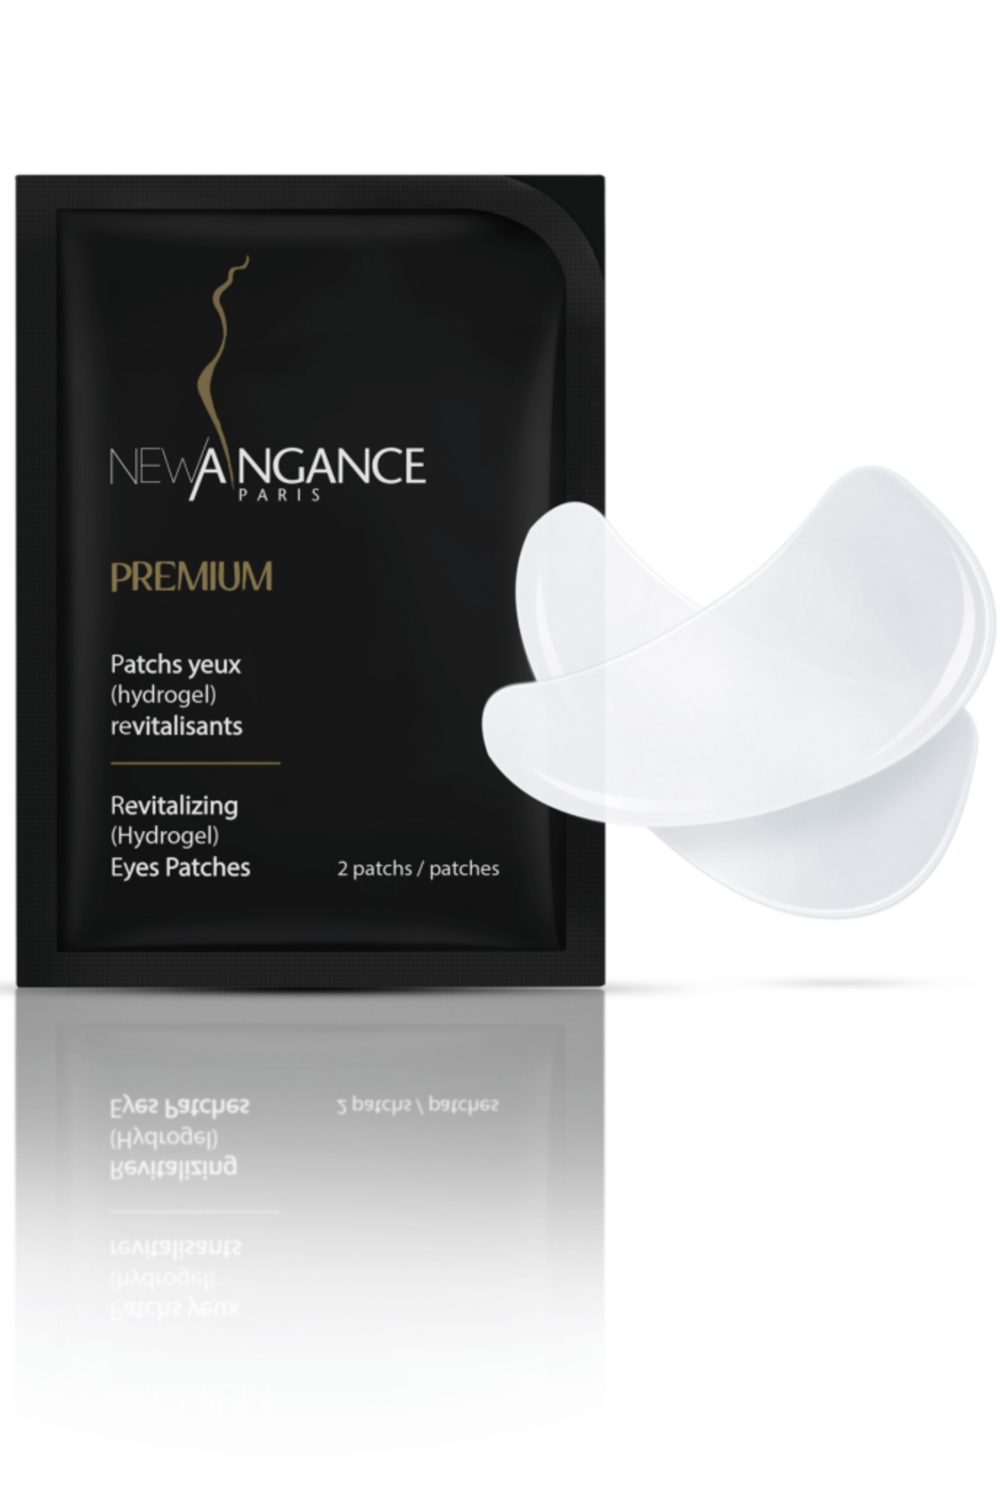 New angance - Patchs yeux Hydrogel